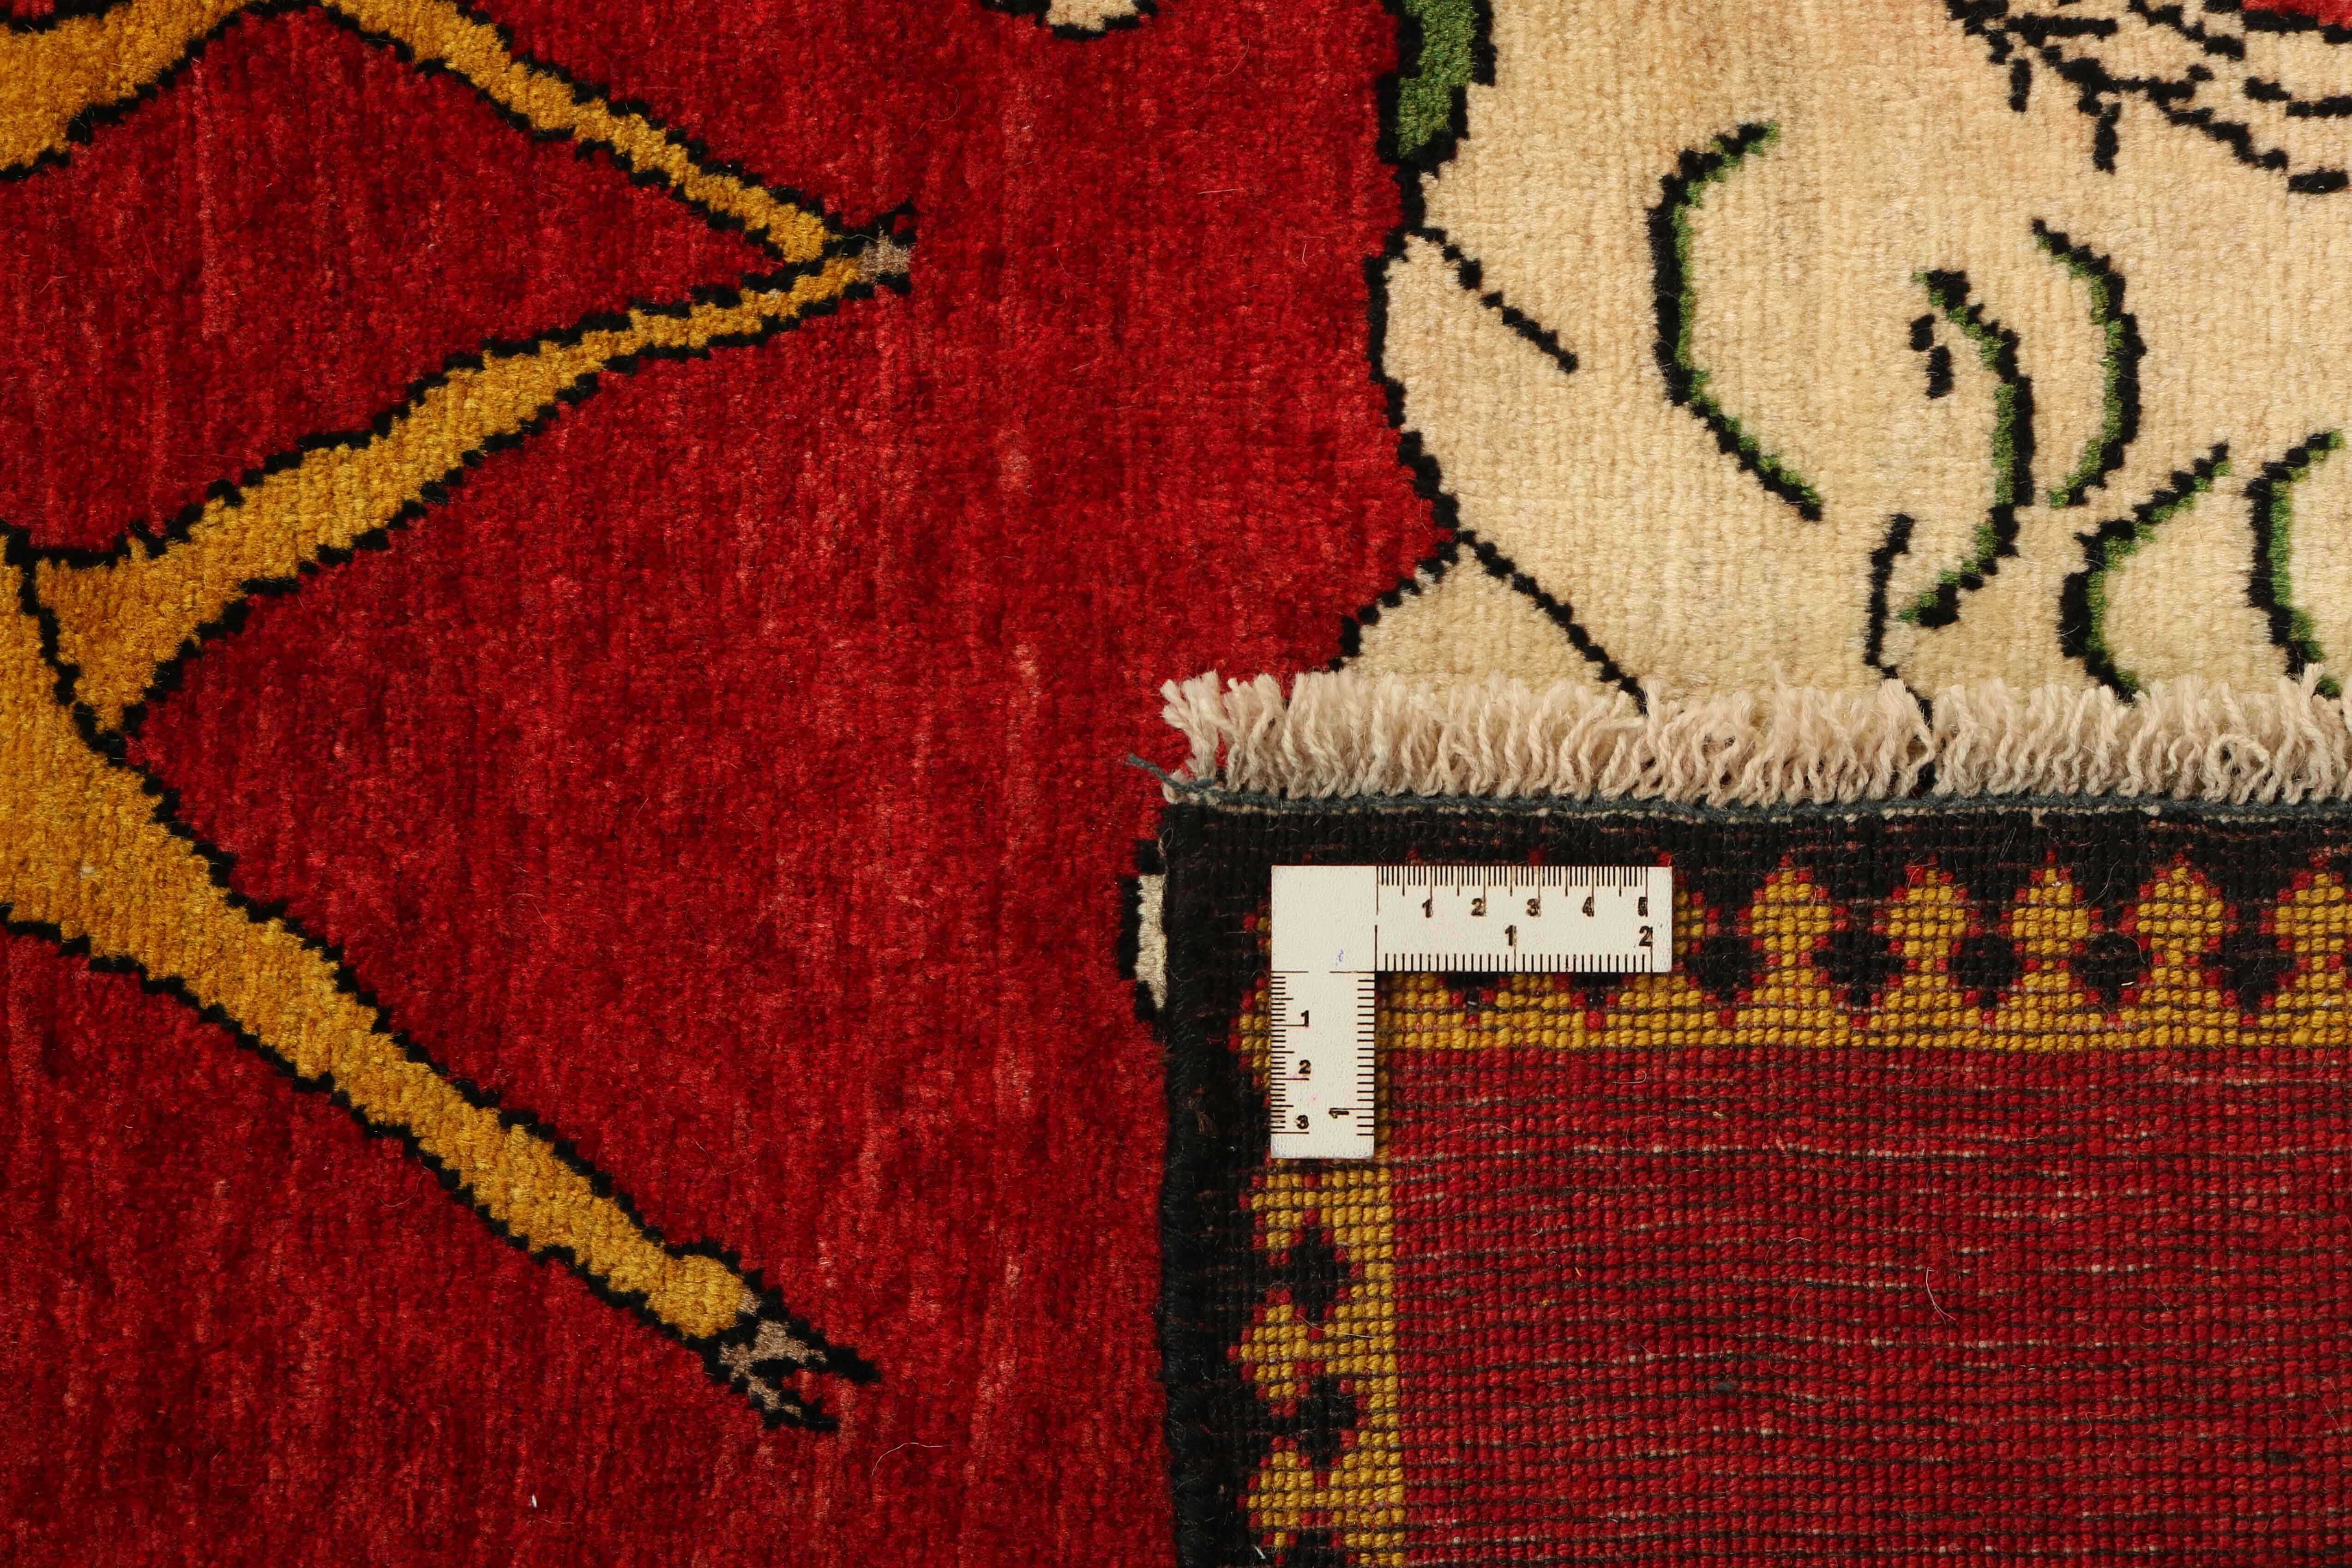 red persian rug with figural design